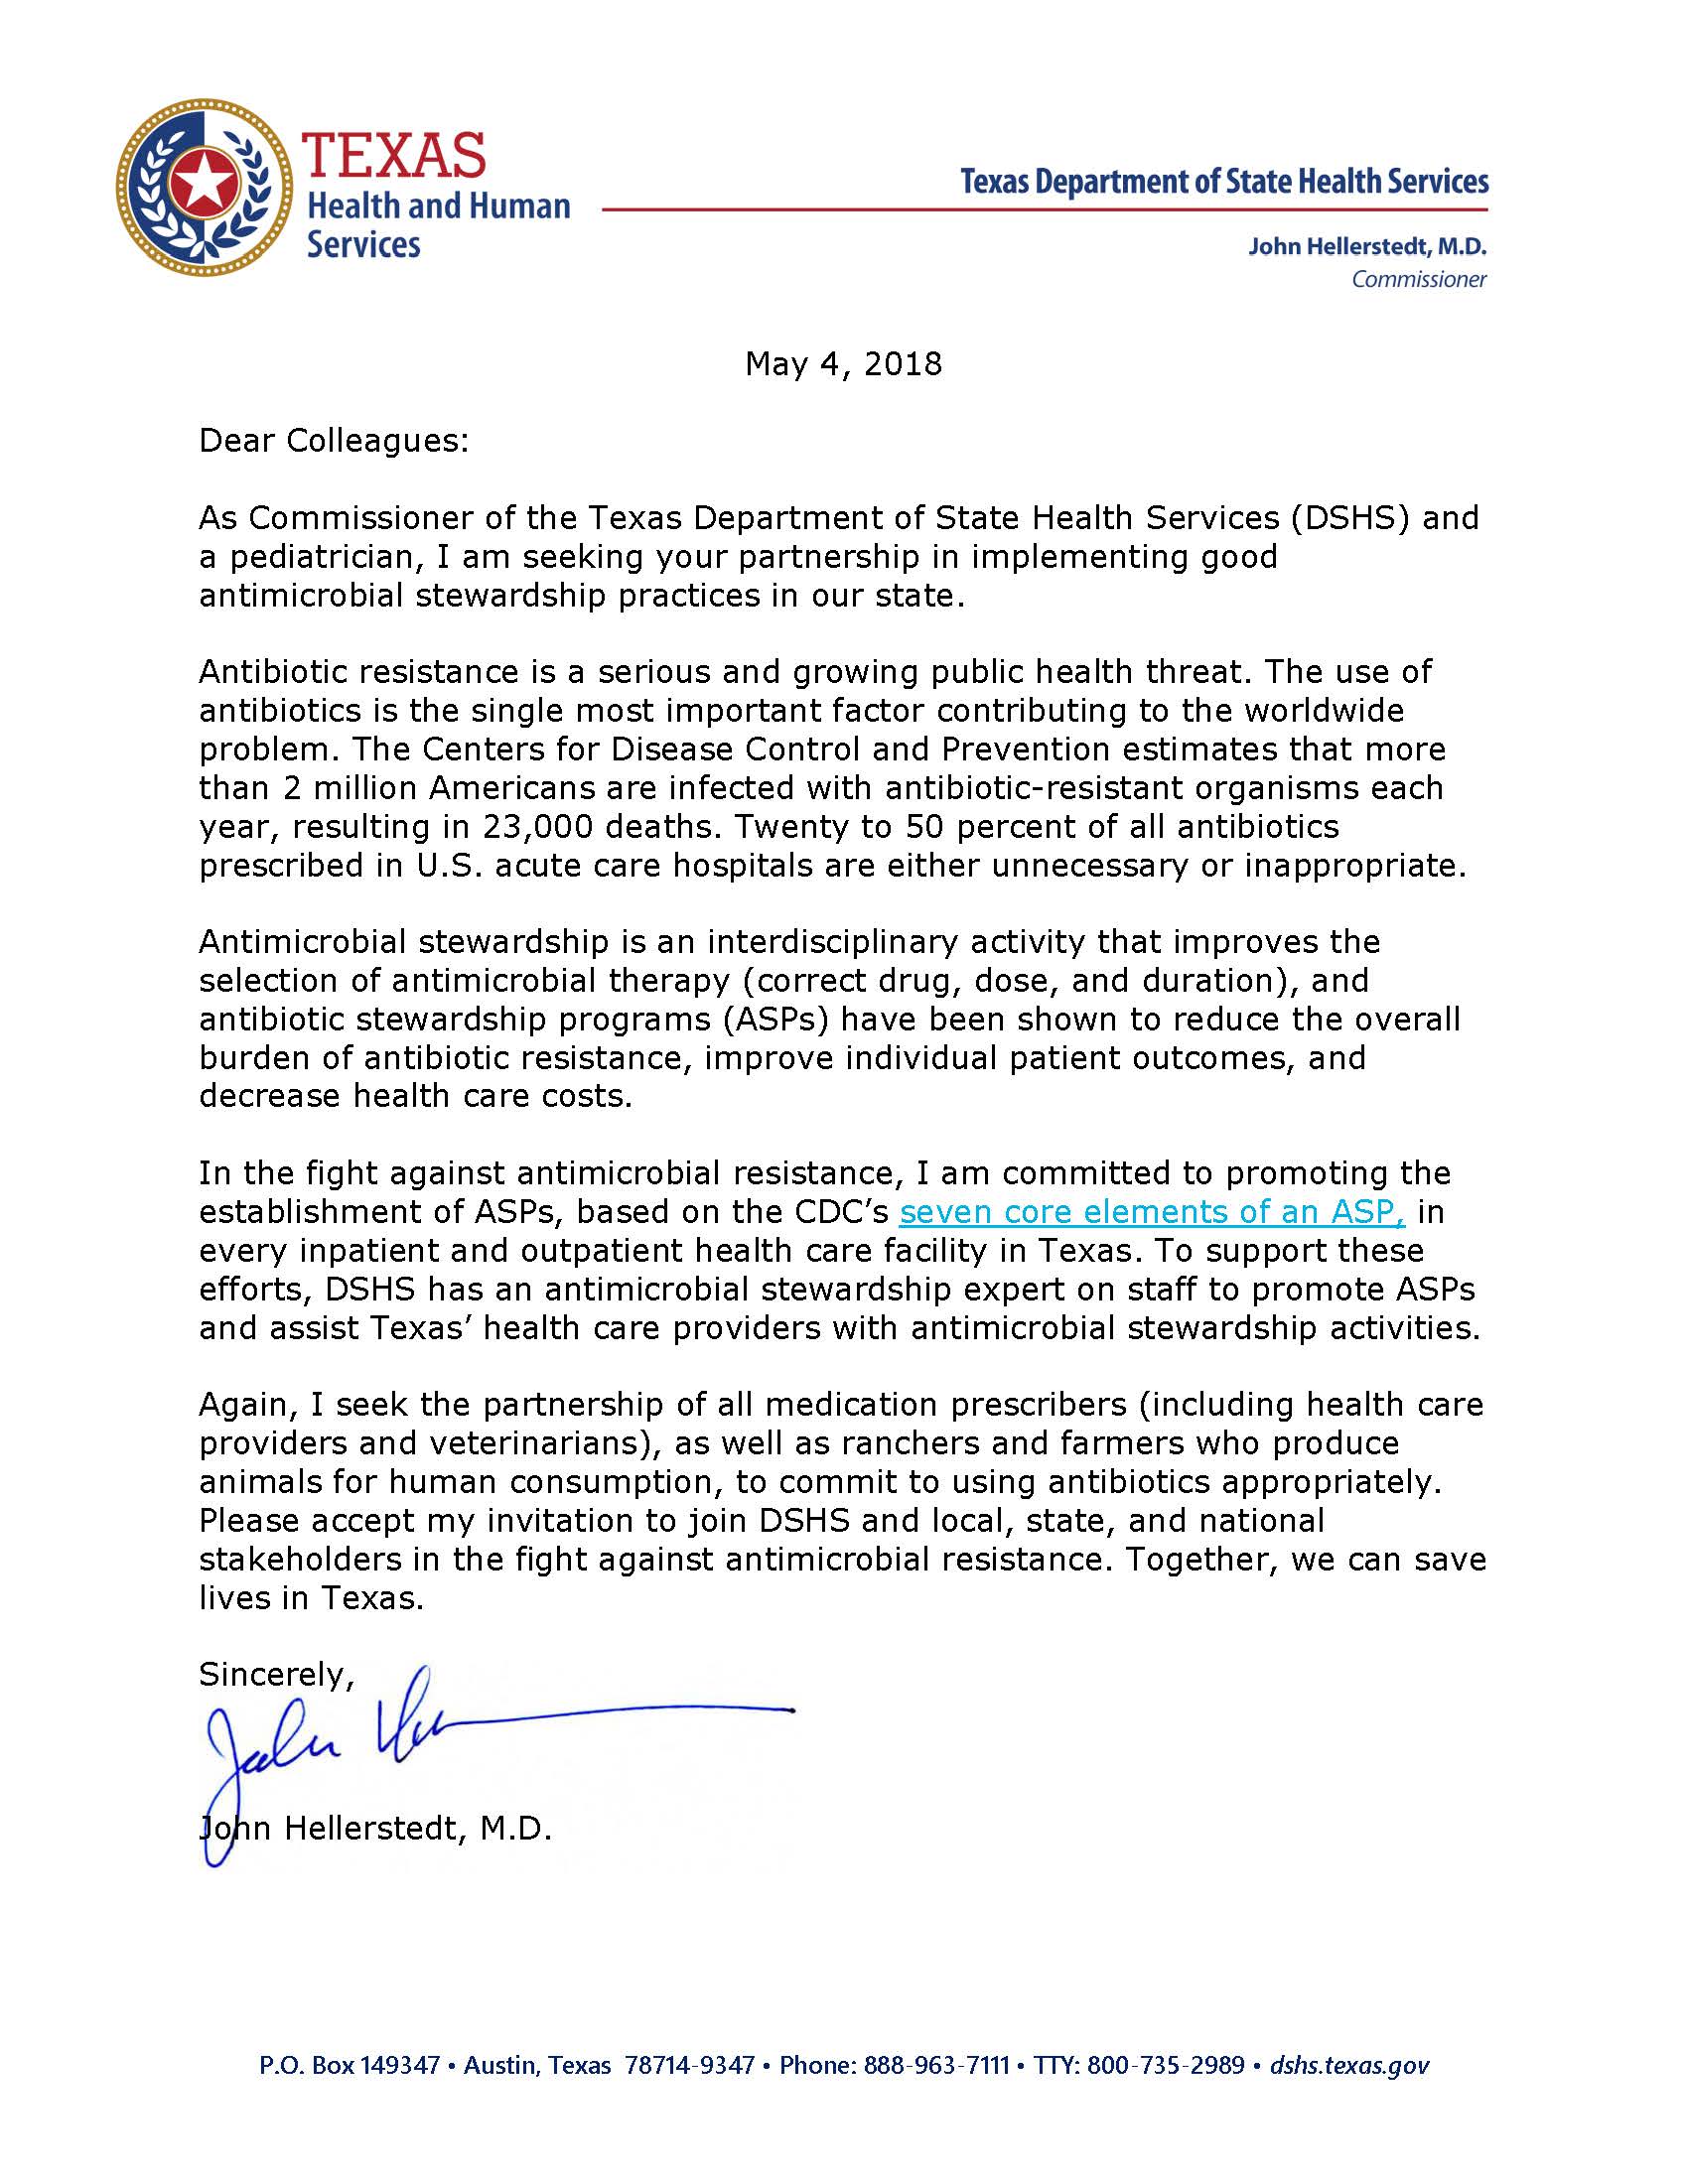 Texas Department of Health Commitment Letter